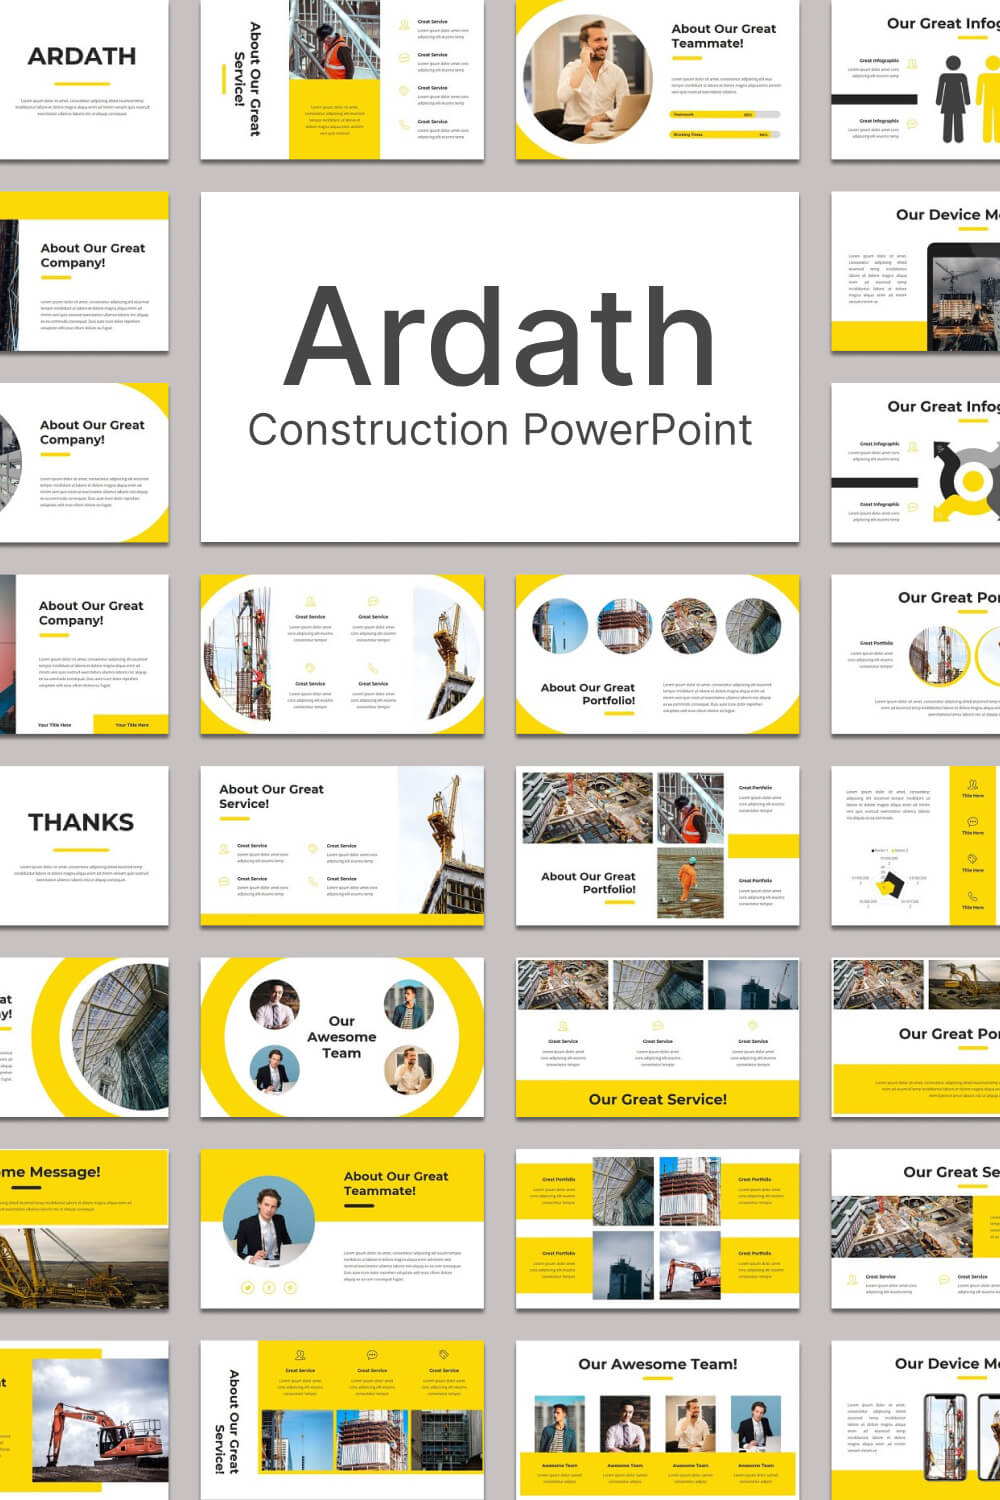 Construction slides and title in the middle "Ardath Construction PowerPoint".